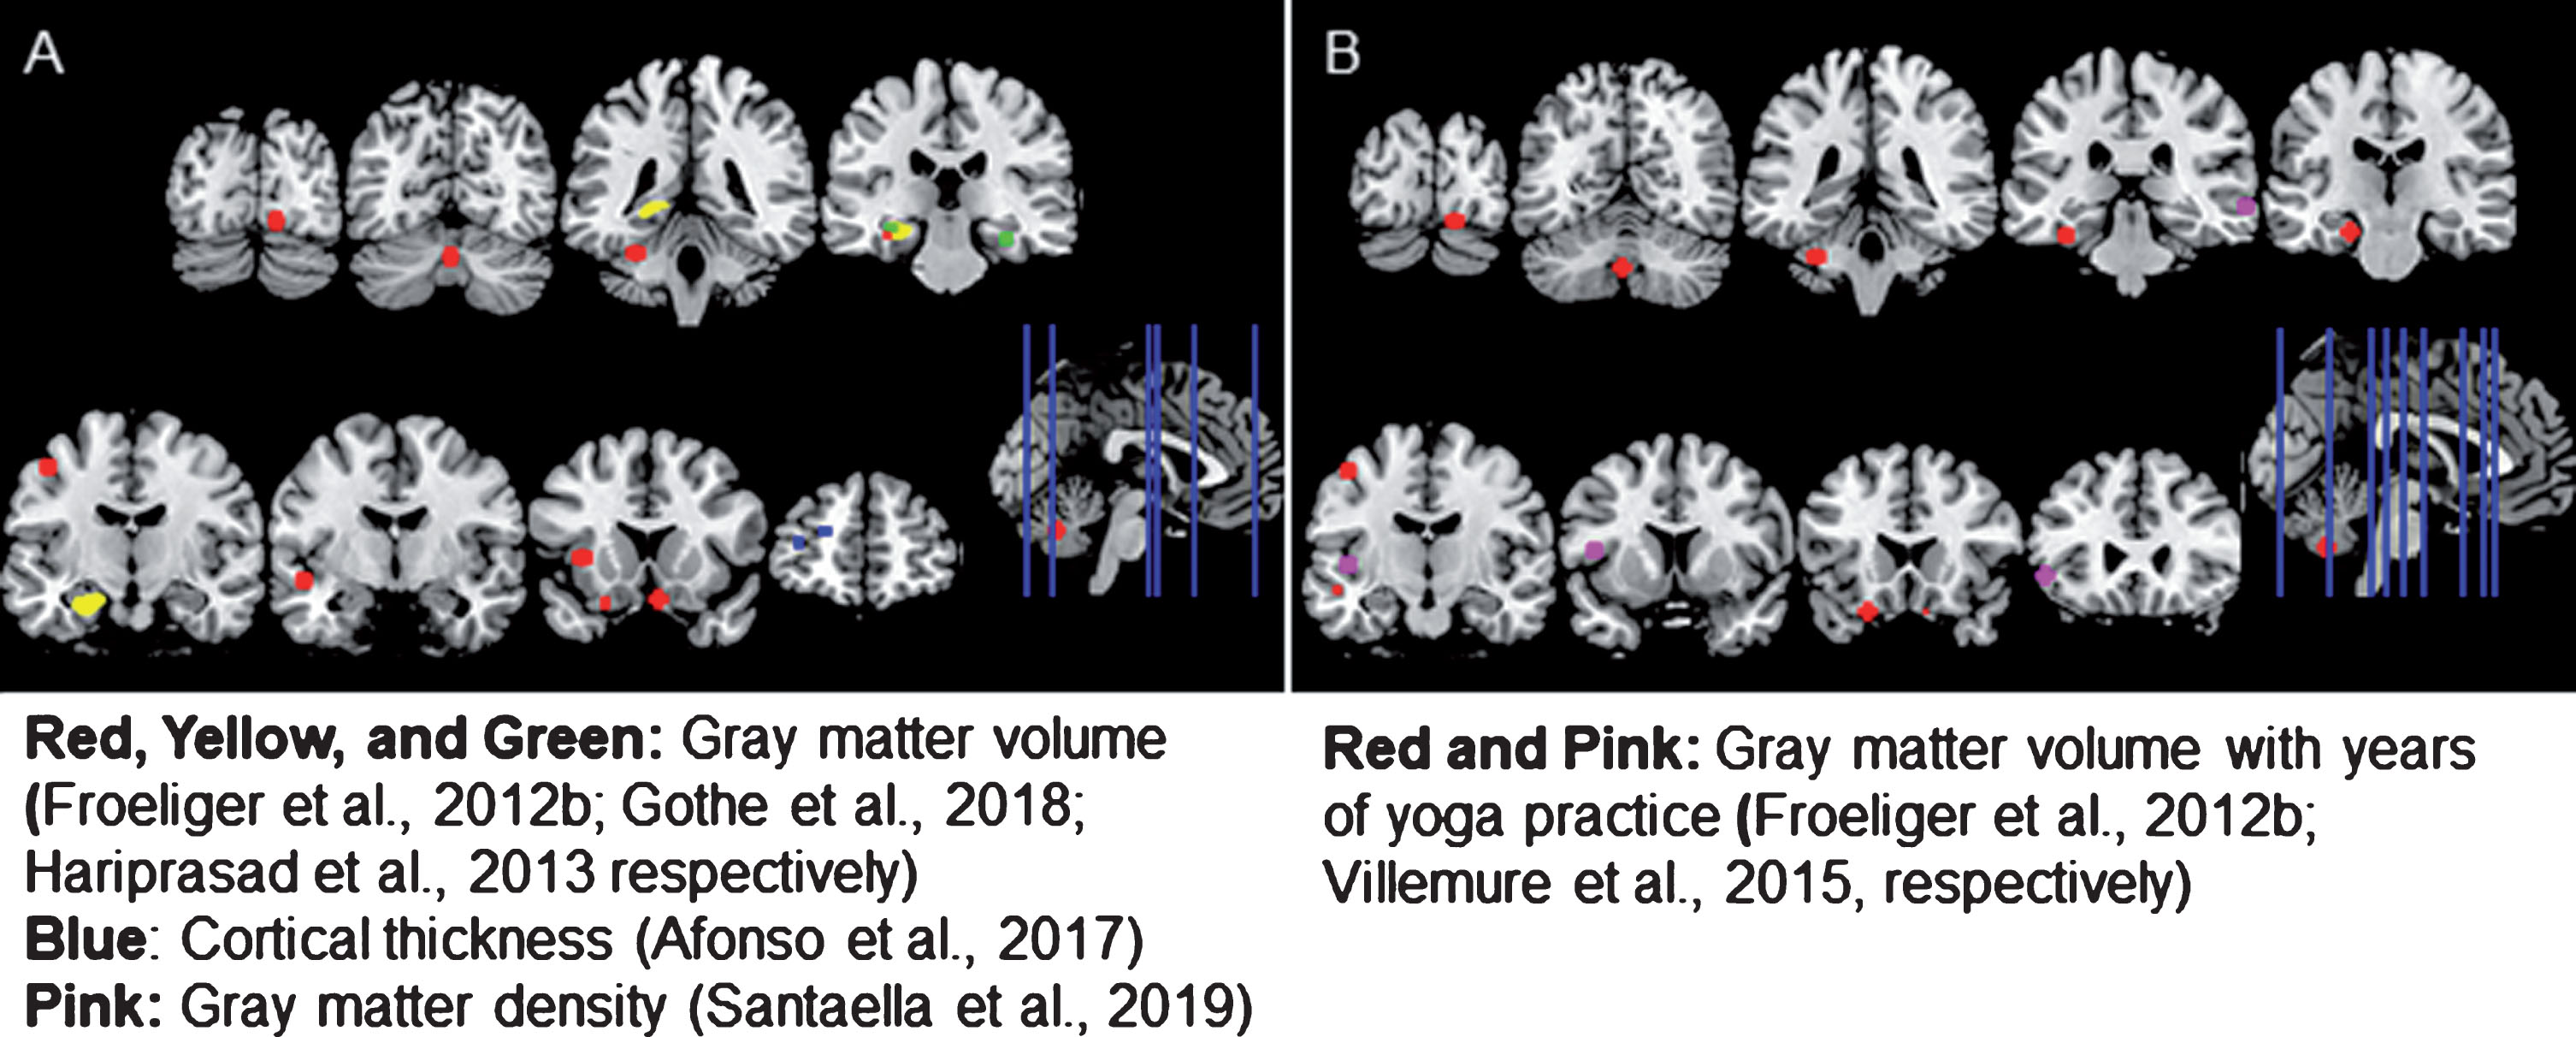 Brain regions showing A) structural differences in yoga-practitioners compared to non-practitioners or B) a dose-dependent relationship between years of yoga practice and brain structure among practitioners. Yoga practitioners exhibited greater cortical thickness, gray matter (GM) volume, and GM density than non-practitioners in a variety of regions. Among yoga-practitioners, a positive relationship between the years of yoga practice and GM volume was also observed in a number of areas. All but one of the regions shown were created by making a 5 mm sphere around the coordinates provided in the studies reviewed. Since Gothe et al. (2018) did not investigate volume differences on a voxel-wise basis, a mask of the whole structure is shown.